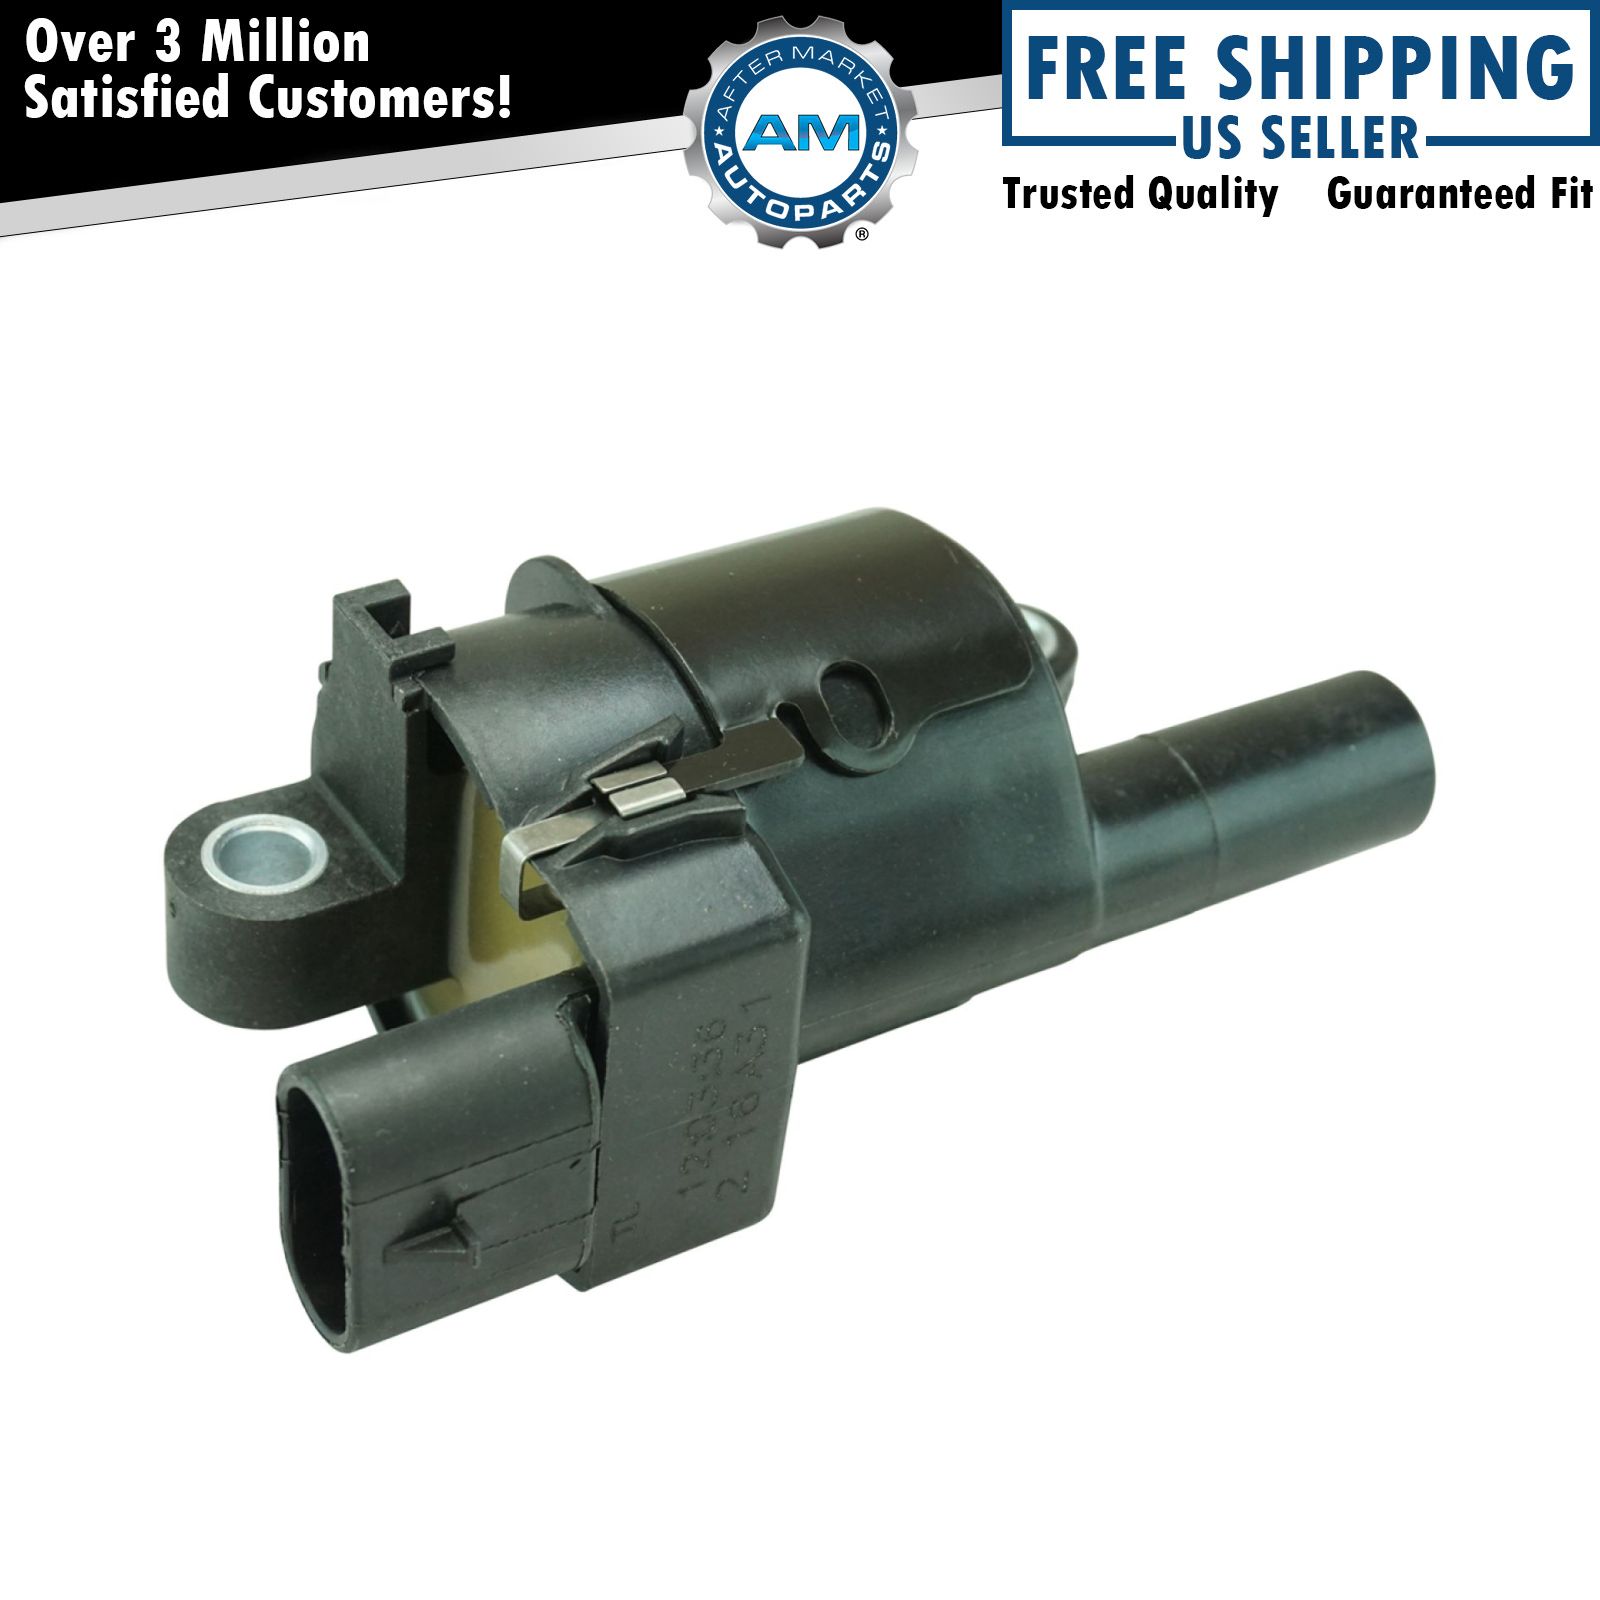 Delphi GN10165 Round Ignition Coil for Buick Cadillac Chevy GMC Hummer Pontiac